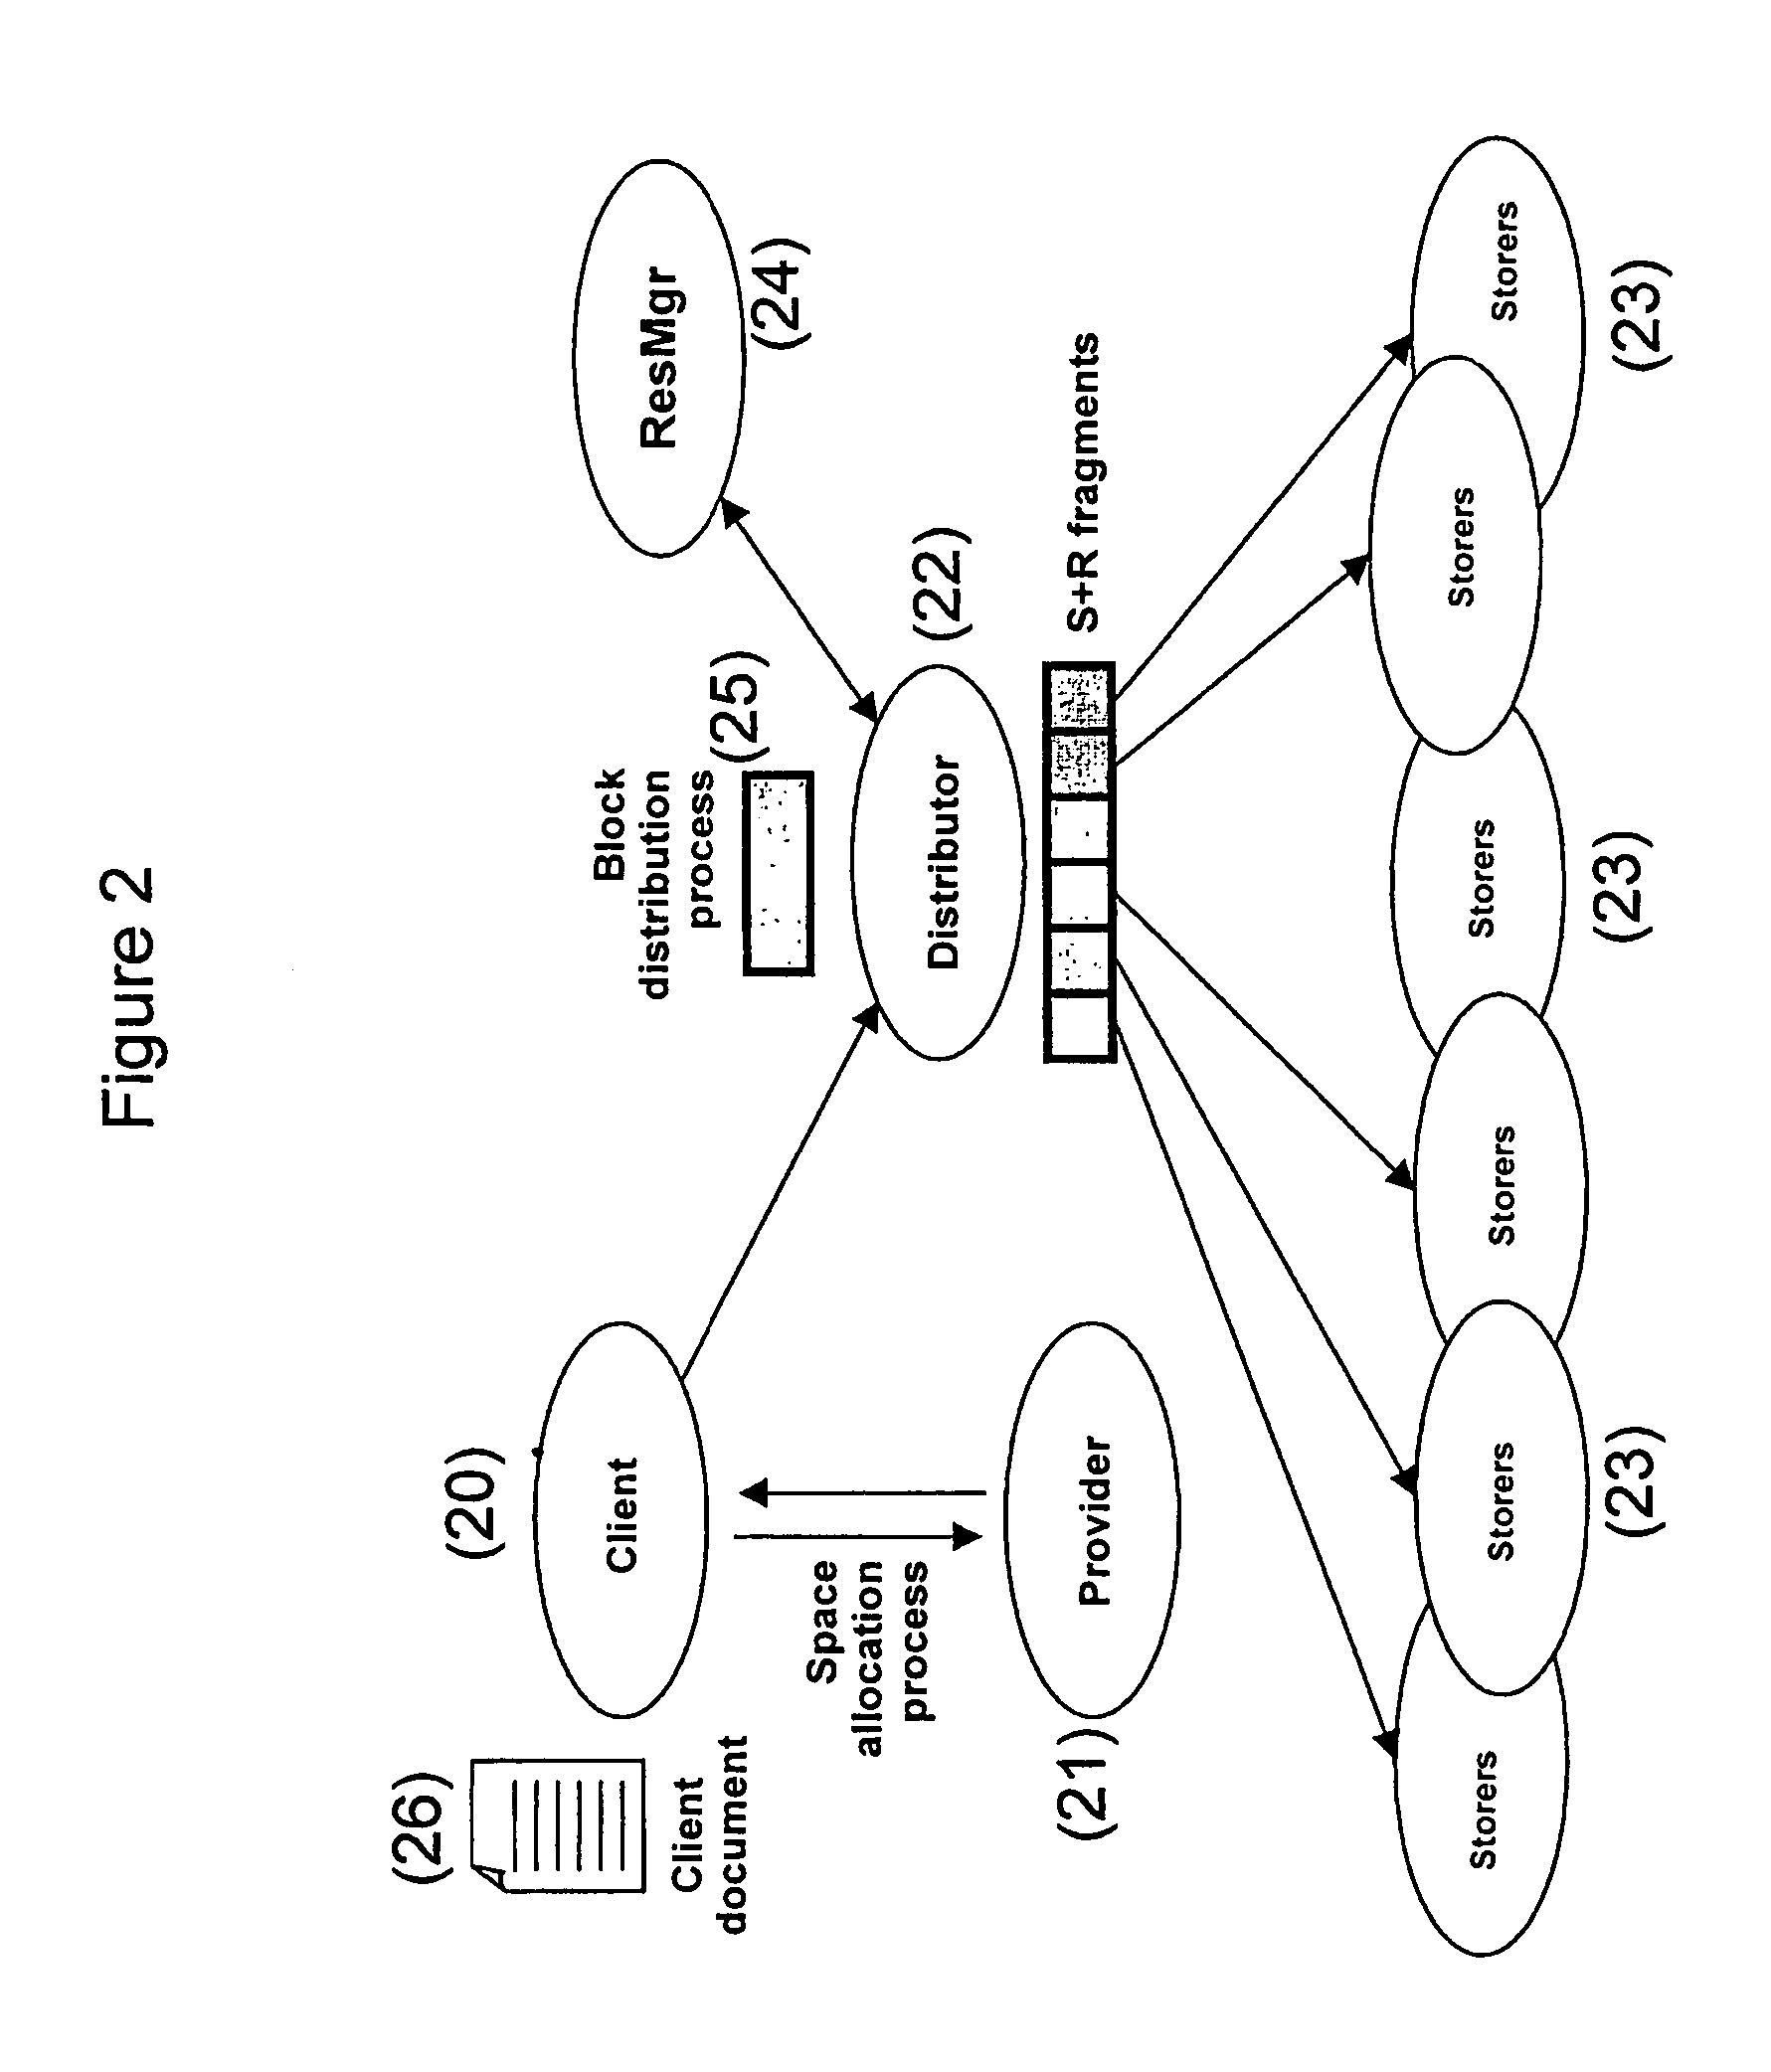 System and method for perennial distributed back up